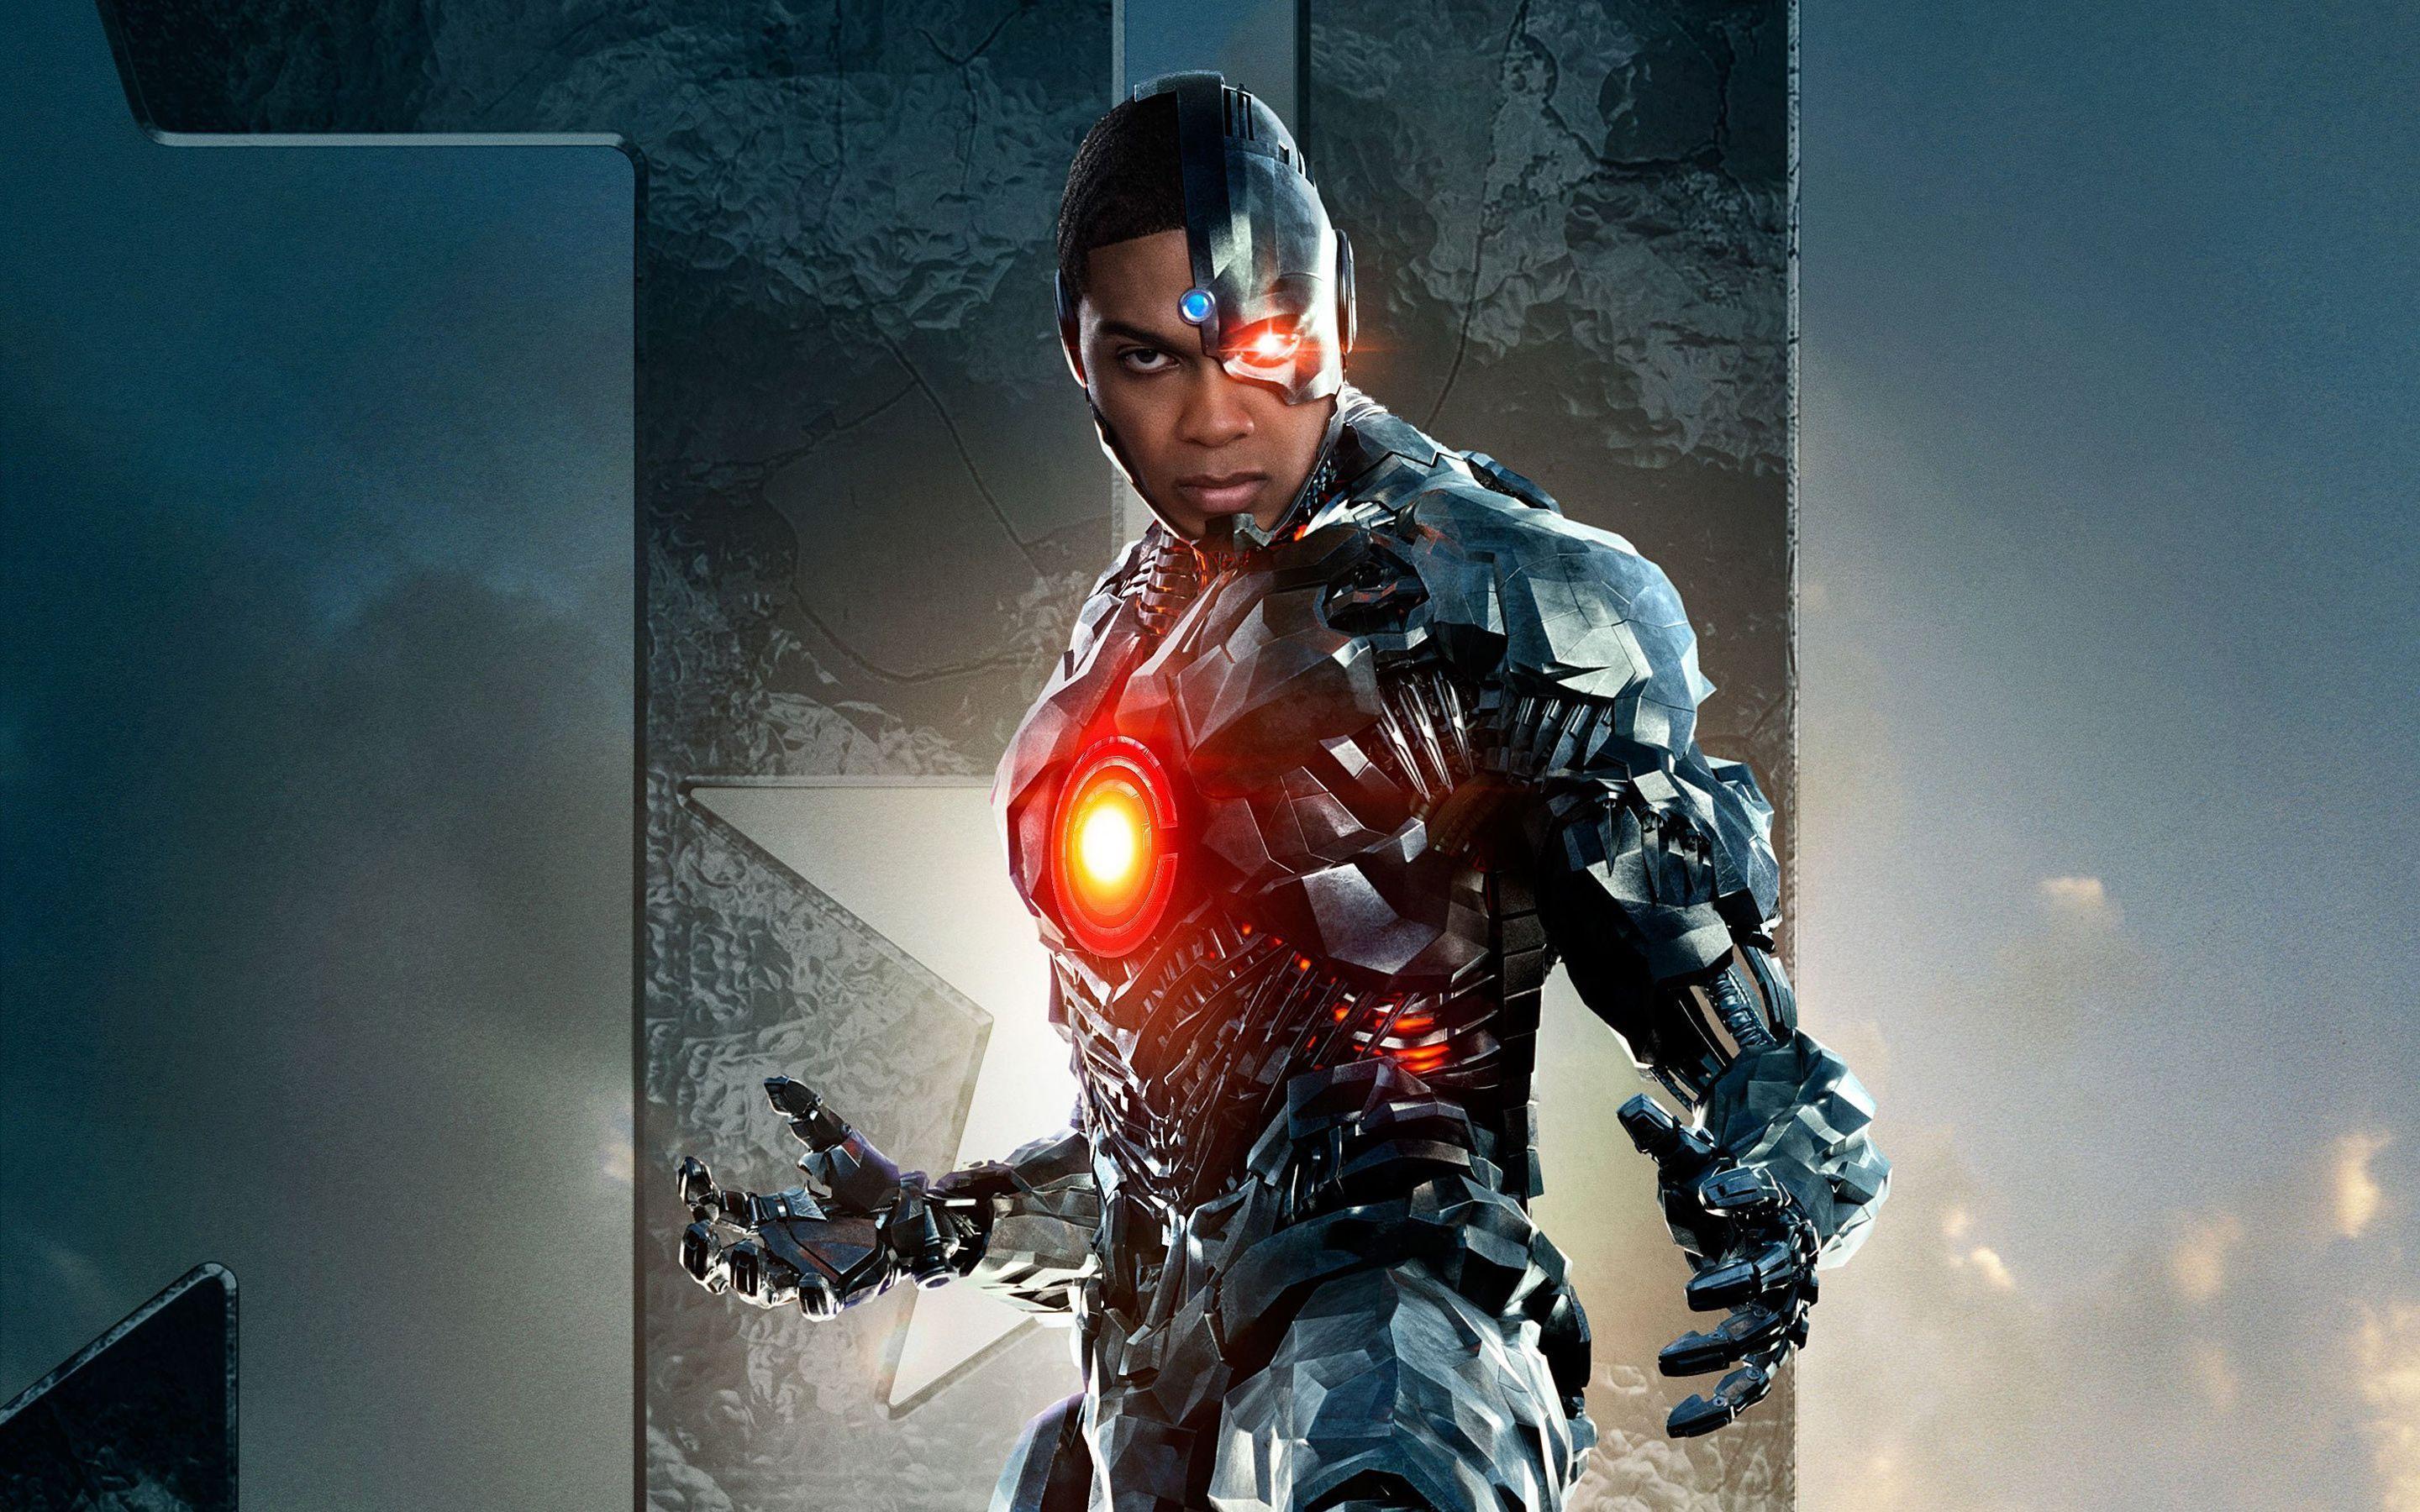 Cyborg in Justice League Wallpaper